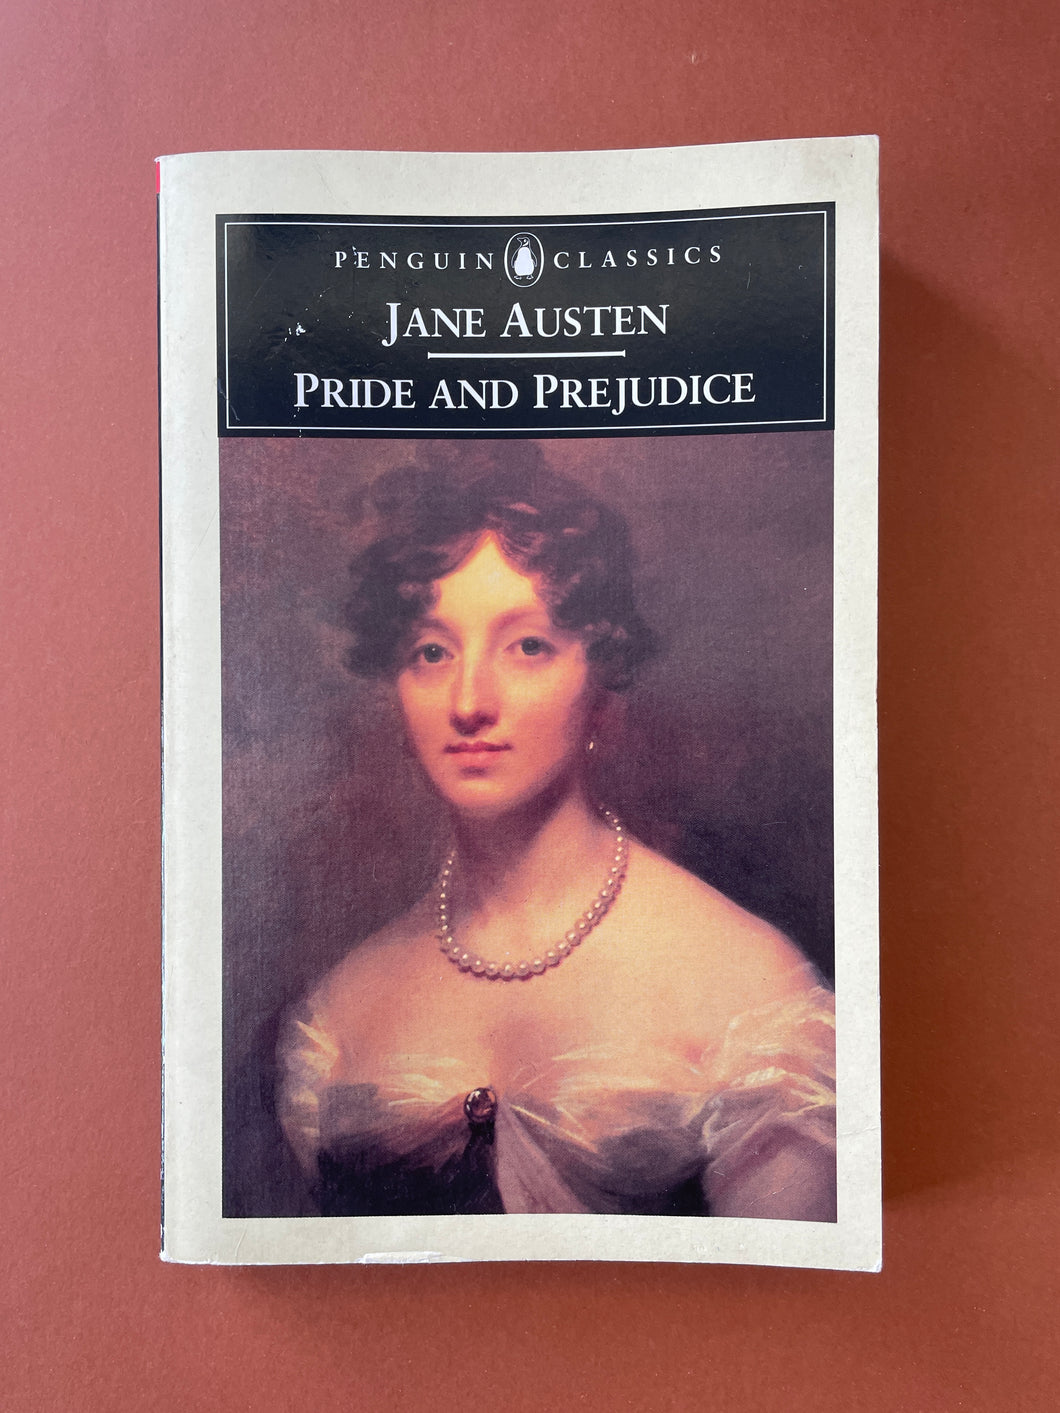 Pride and Prejudice by Jane Austen: photo of the front cover which shows minor scuff marks, creasing and scratches.